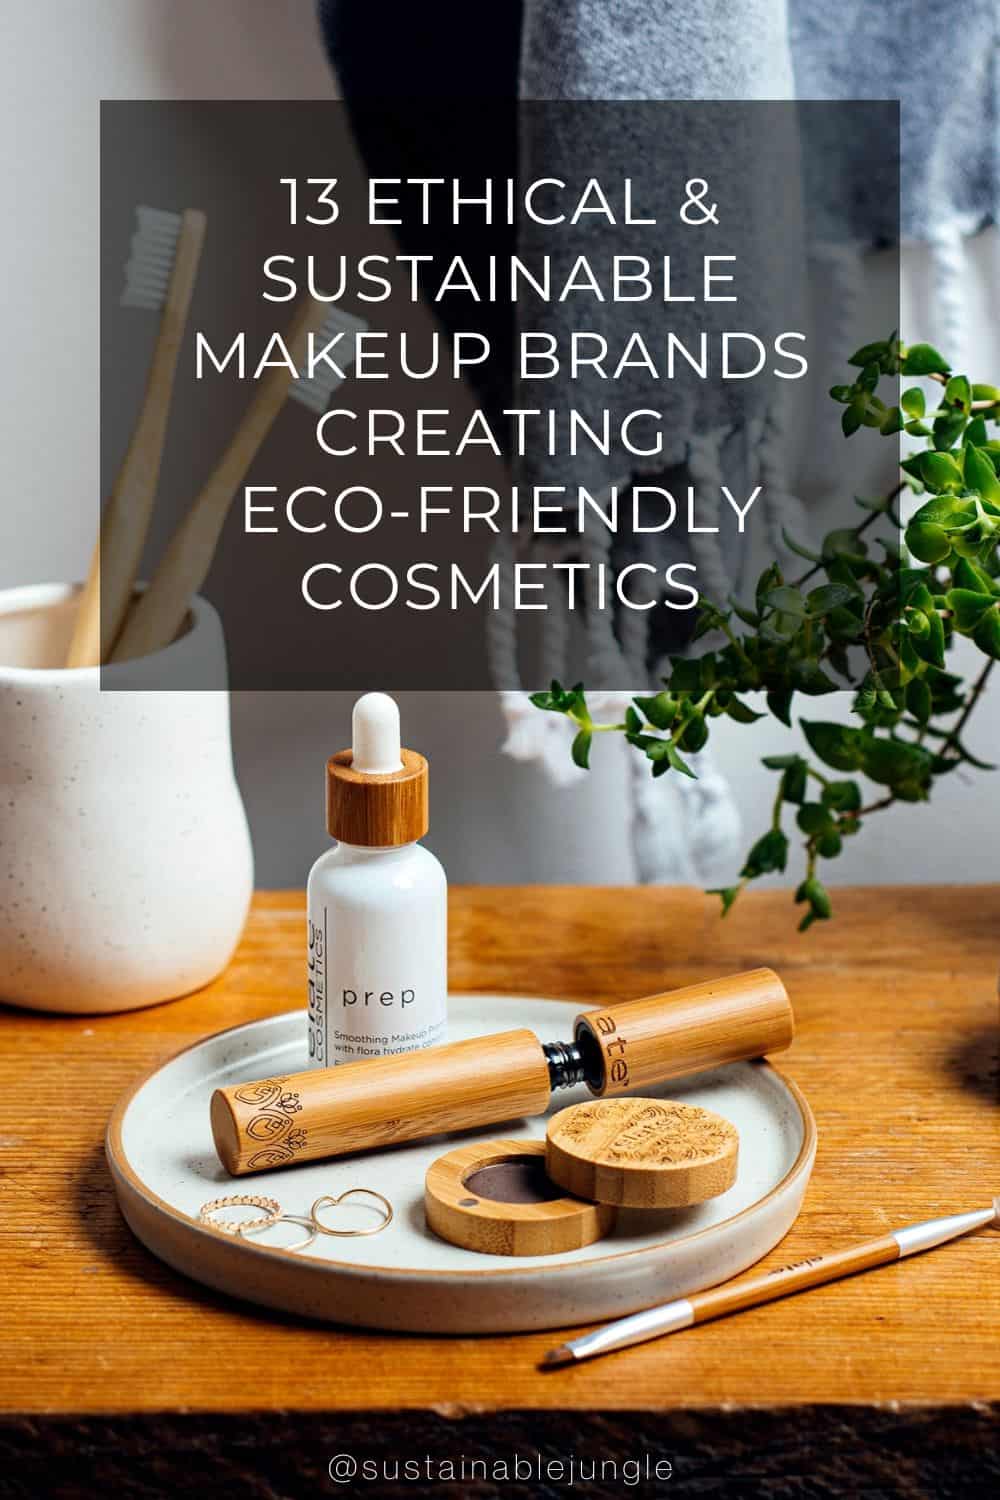 13 Ethical & Sustainable Makeup Brands Creating Eco-Friendly Cosmetics Image by Elate Cosmetics #sustainablemakeupbrands #bestsustainablemakeupbrands #sustainablecosmeticsbrands #makeupbrandsthataresustainable #ethicalmakeupbrands #ethicalmicamakeupbrands #sustainablejungle